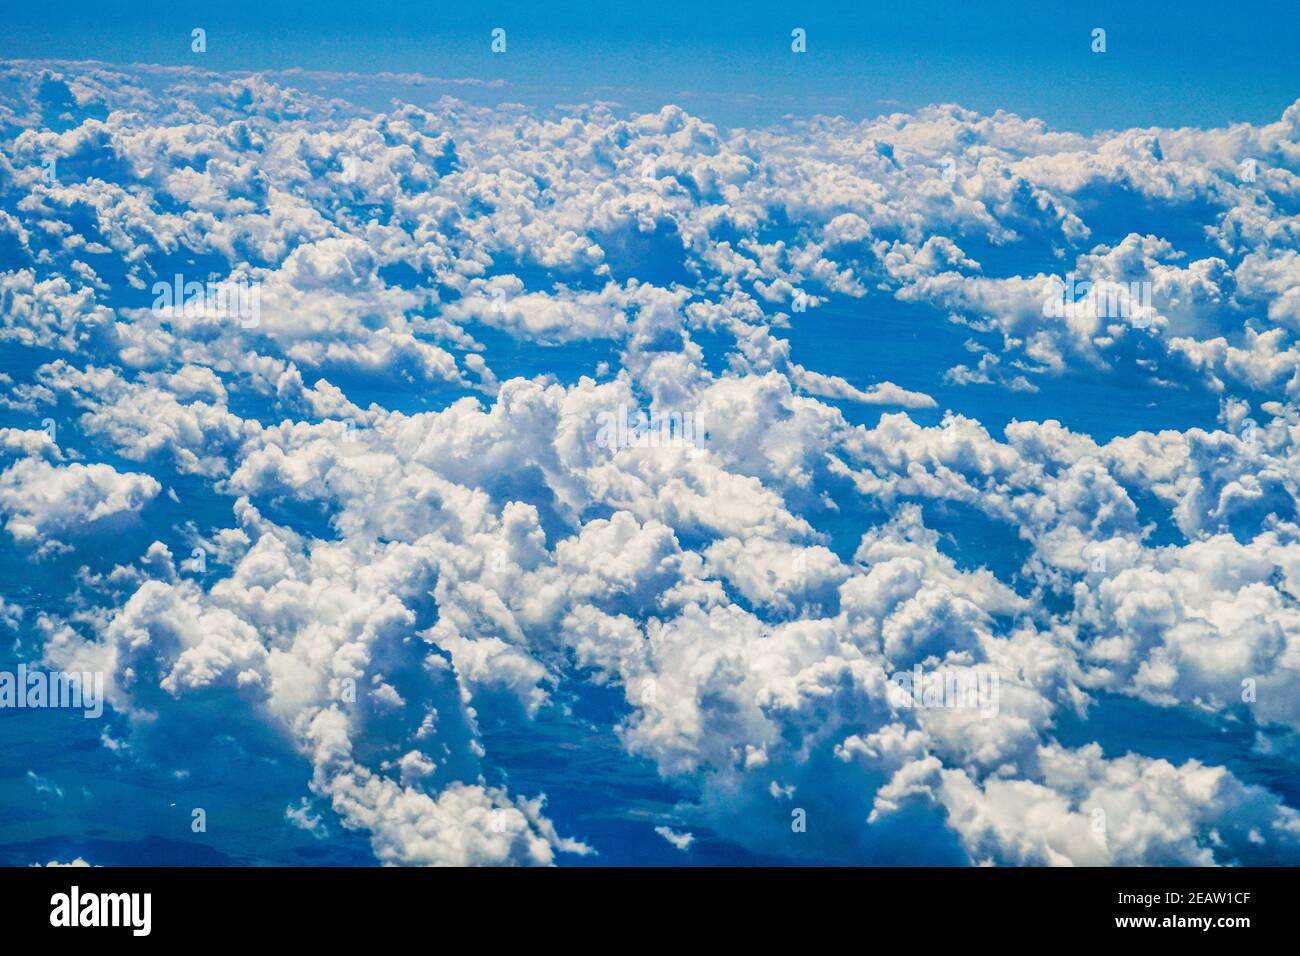 Landscape as seen from an airplane Stock Photo